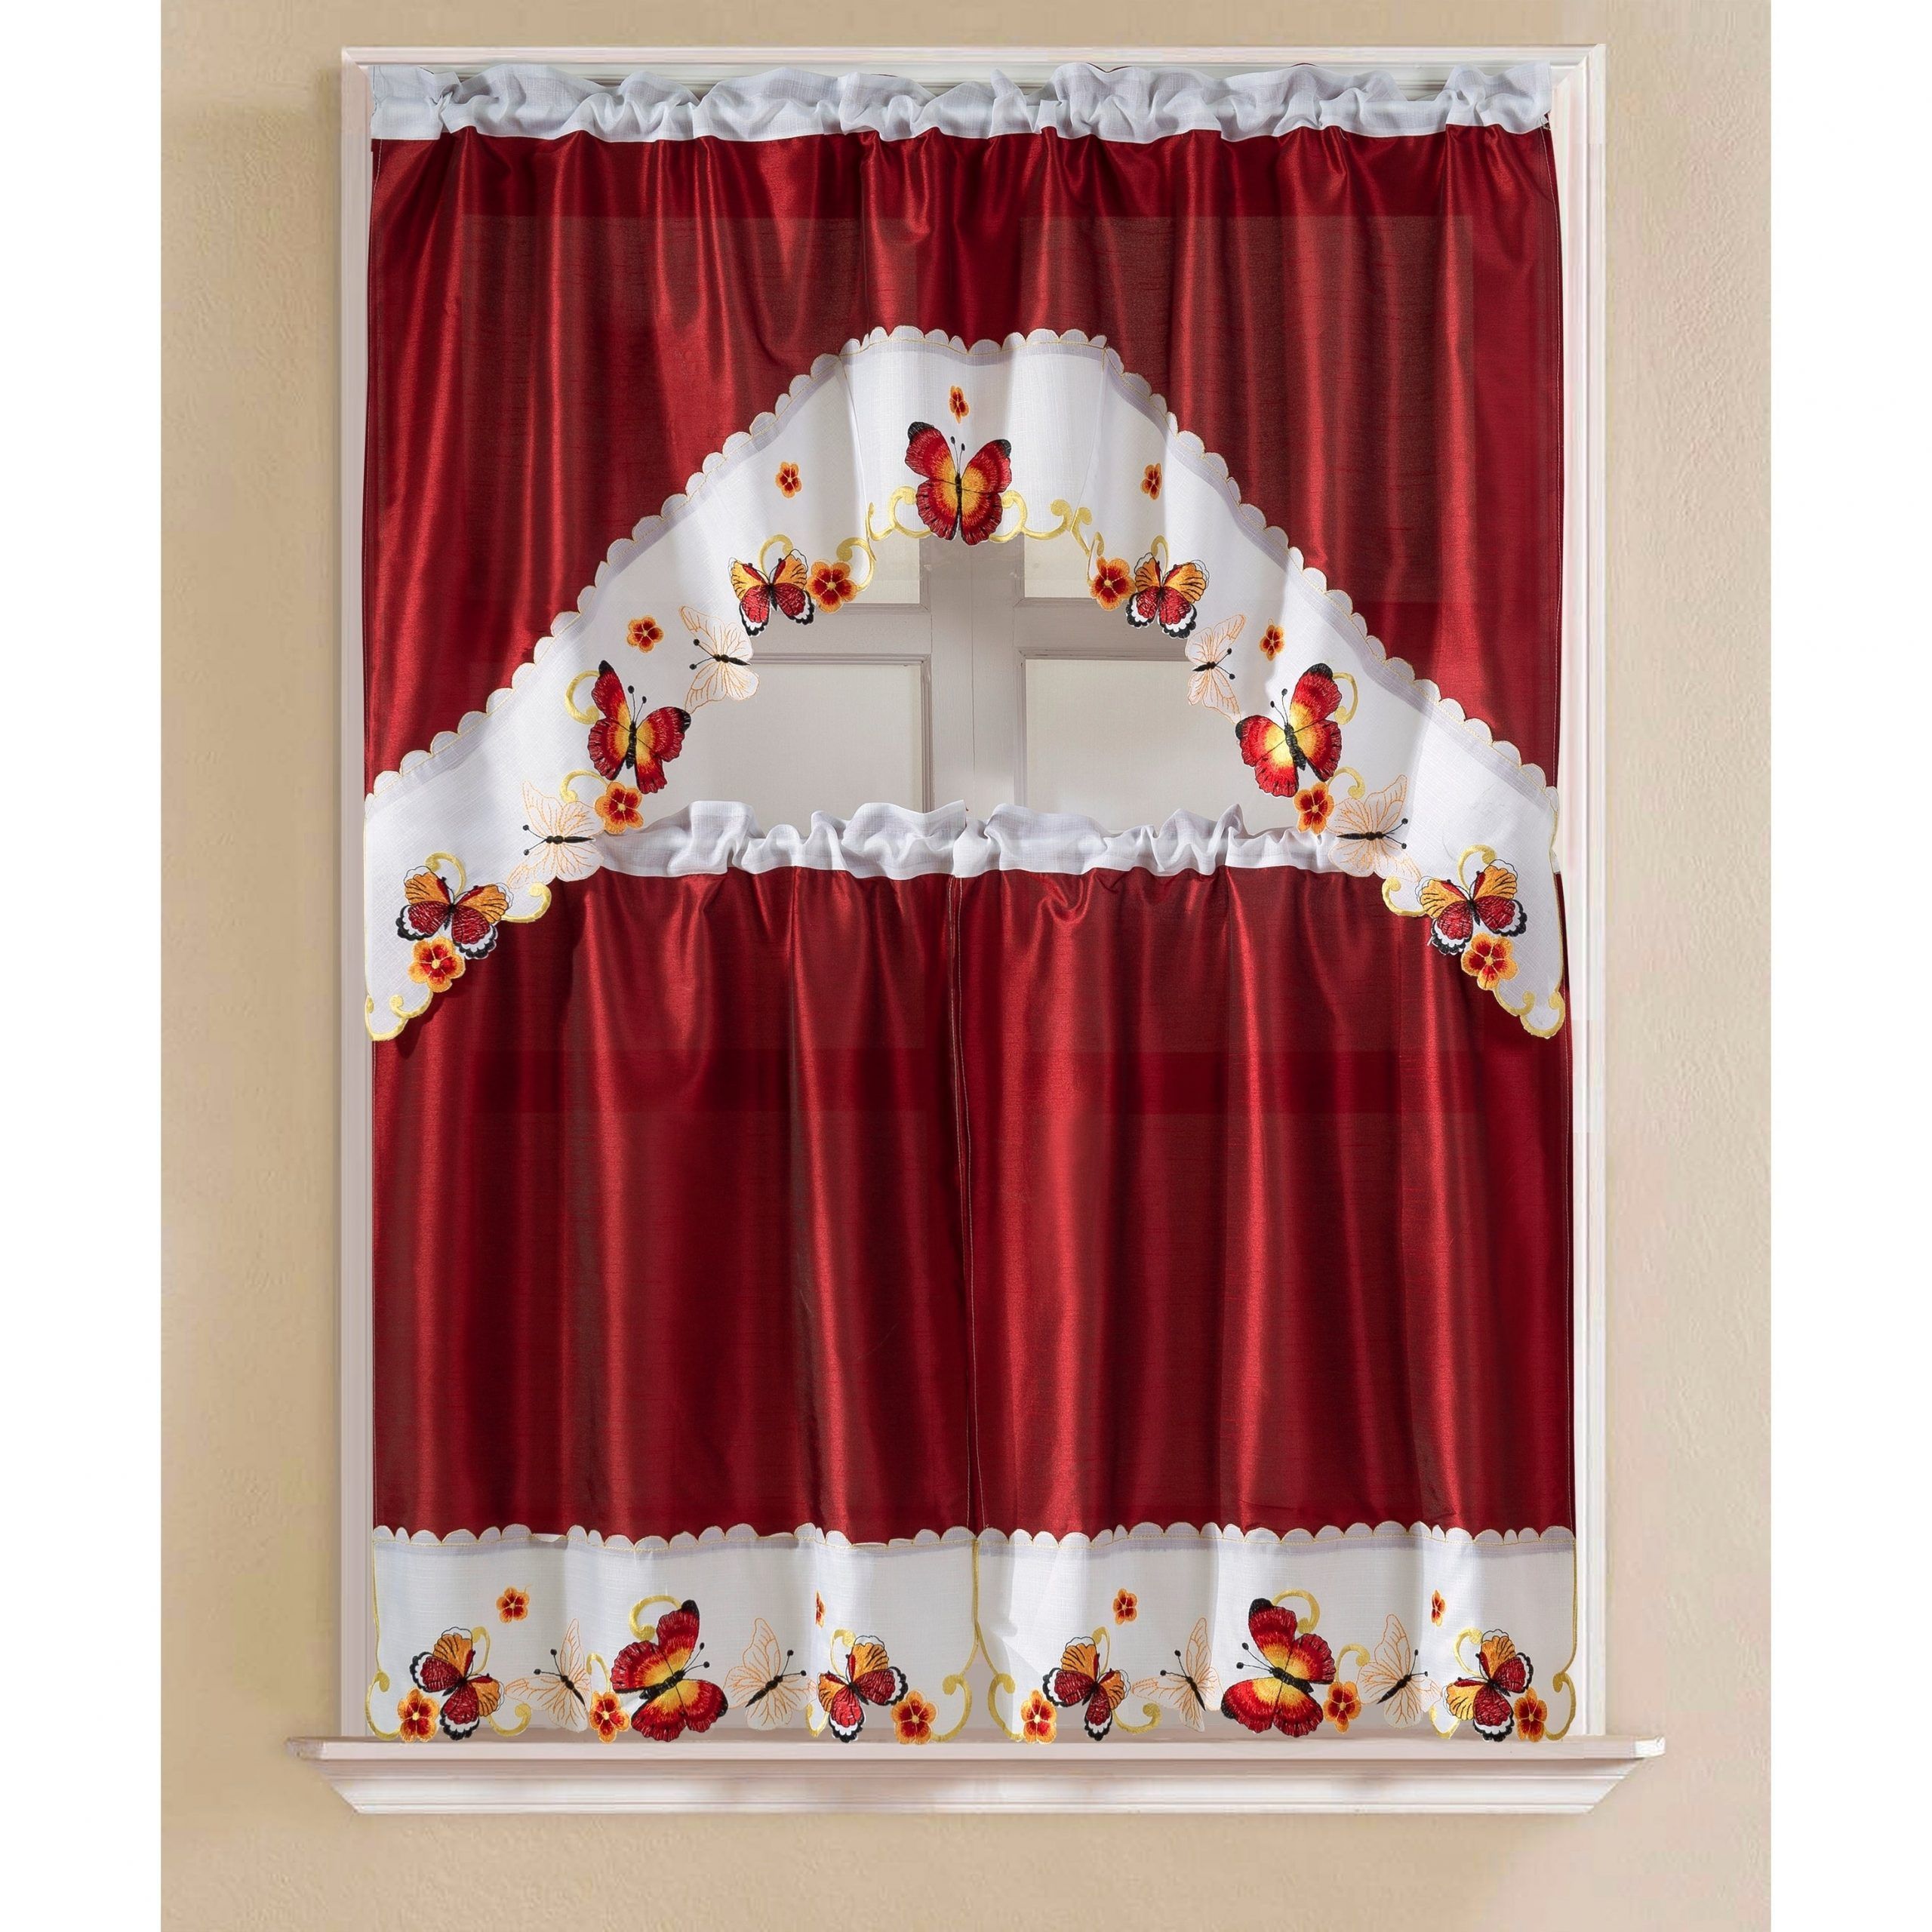 Porch & Den Eastview Faux Silk 3 Piece Kitchen Curtain Set Regarding Window Curtains Sets With Colorful Marketplace Vegetable And Sunflower Print (View 10 of 20)